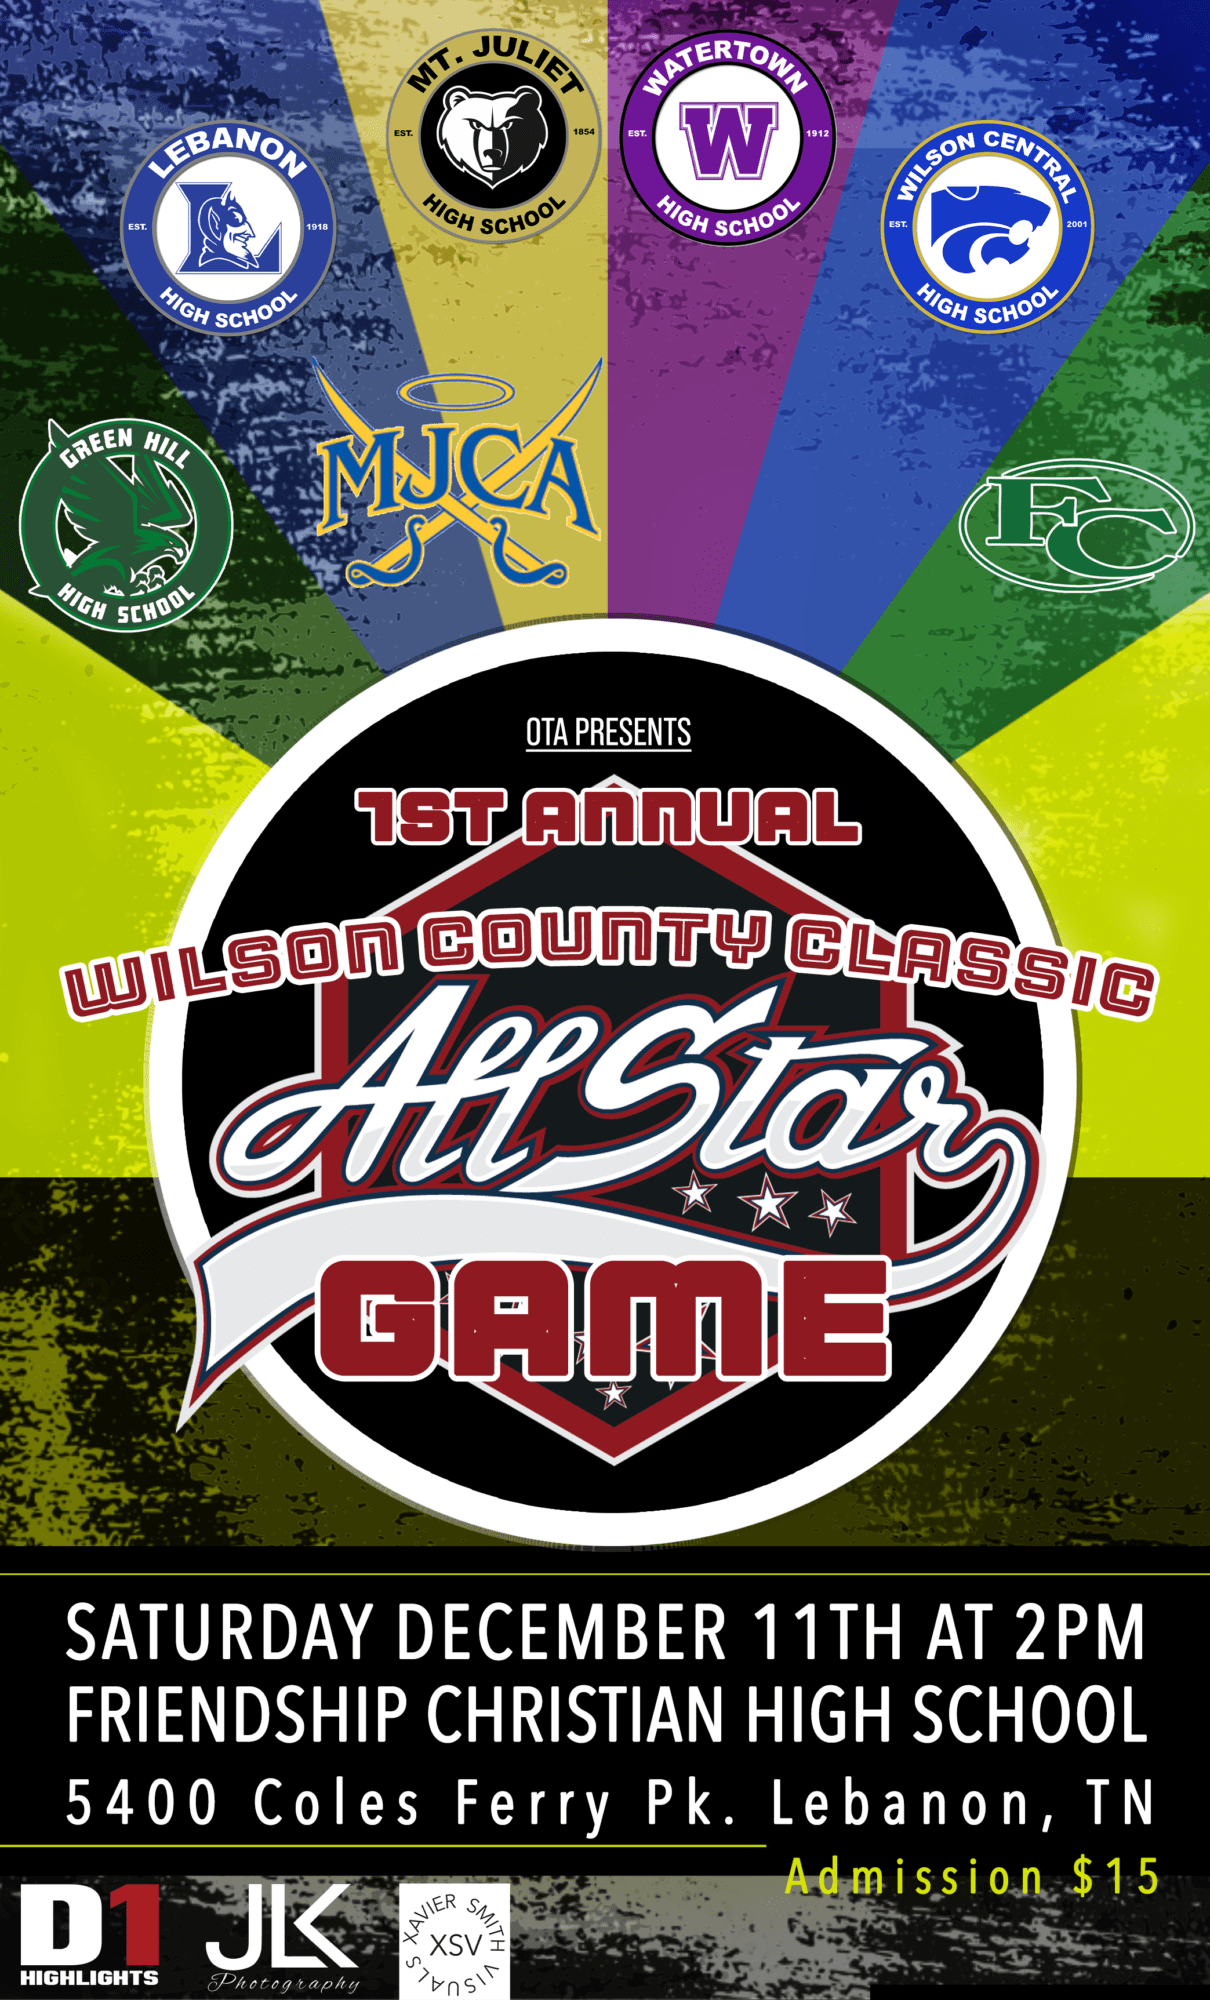 Wilson County Classic All Star Game